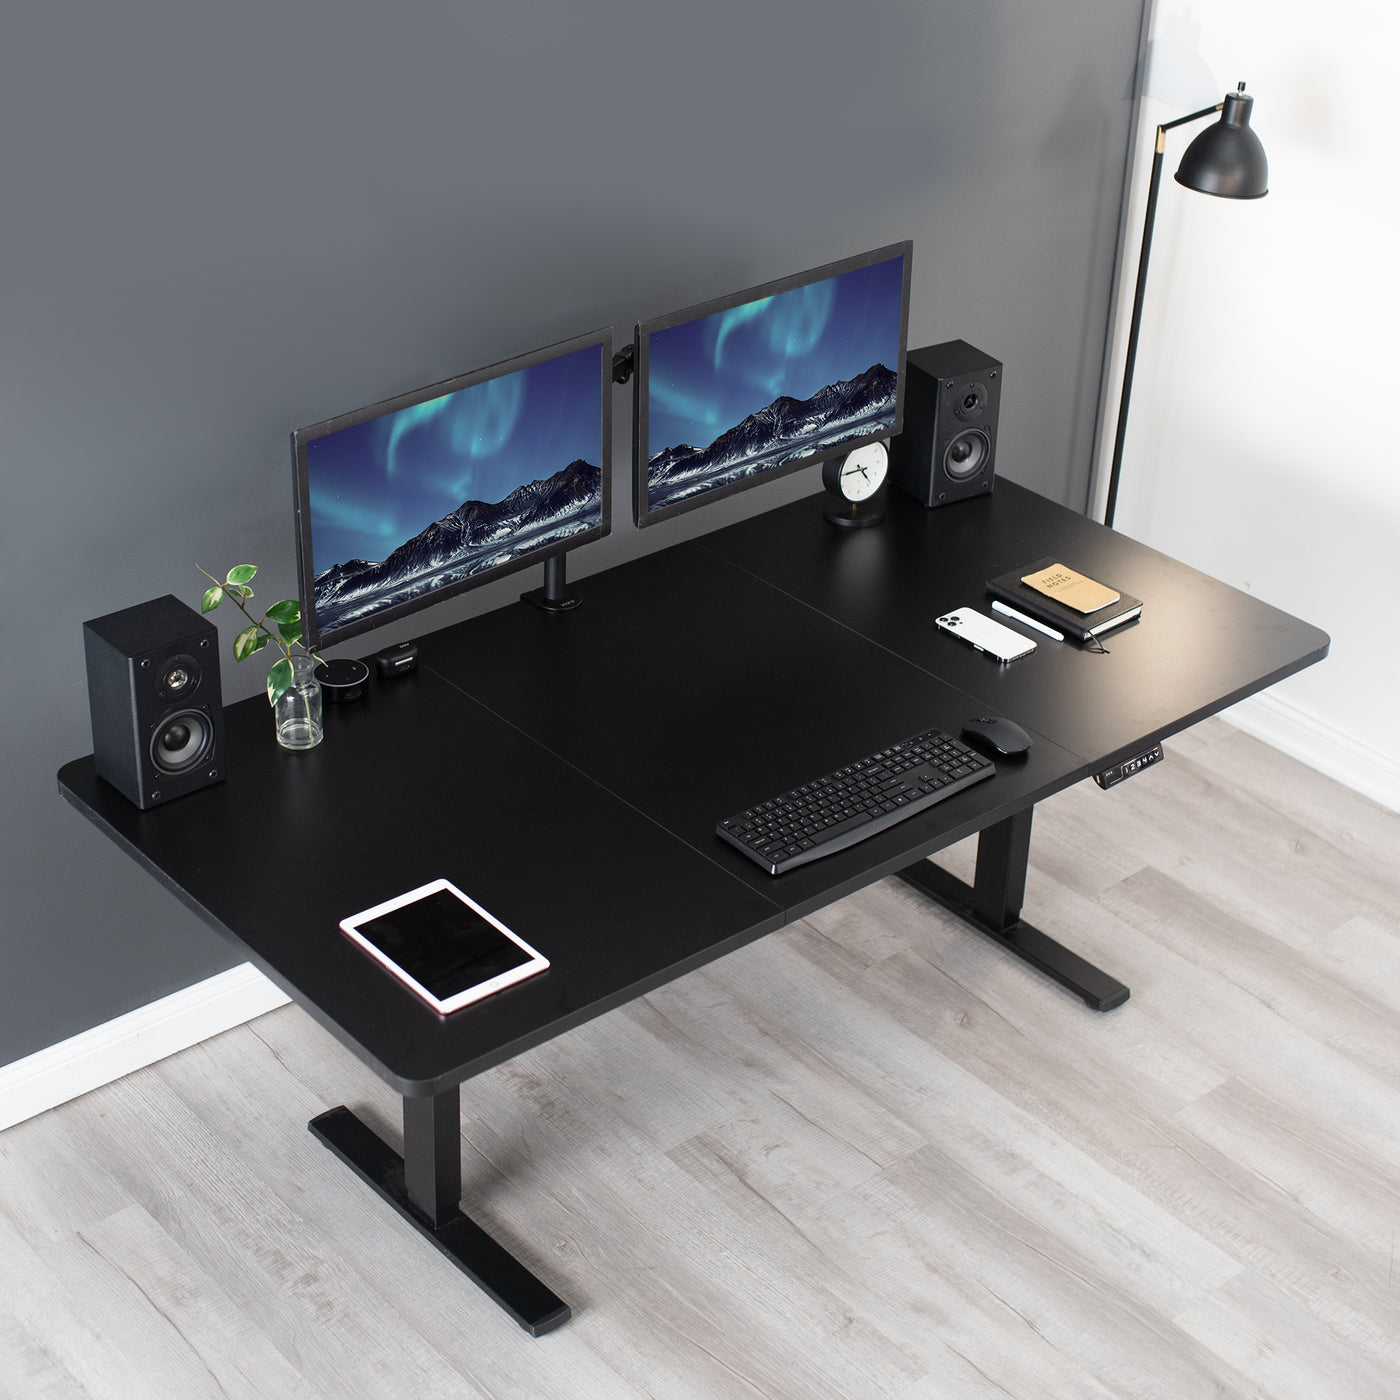 Compatible with both manual and electric frames measuring 51” to 70” in length, this extra-wide table top gives you options!